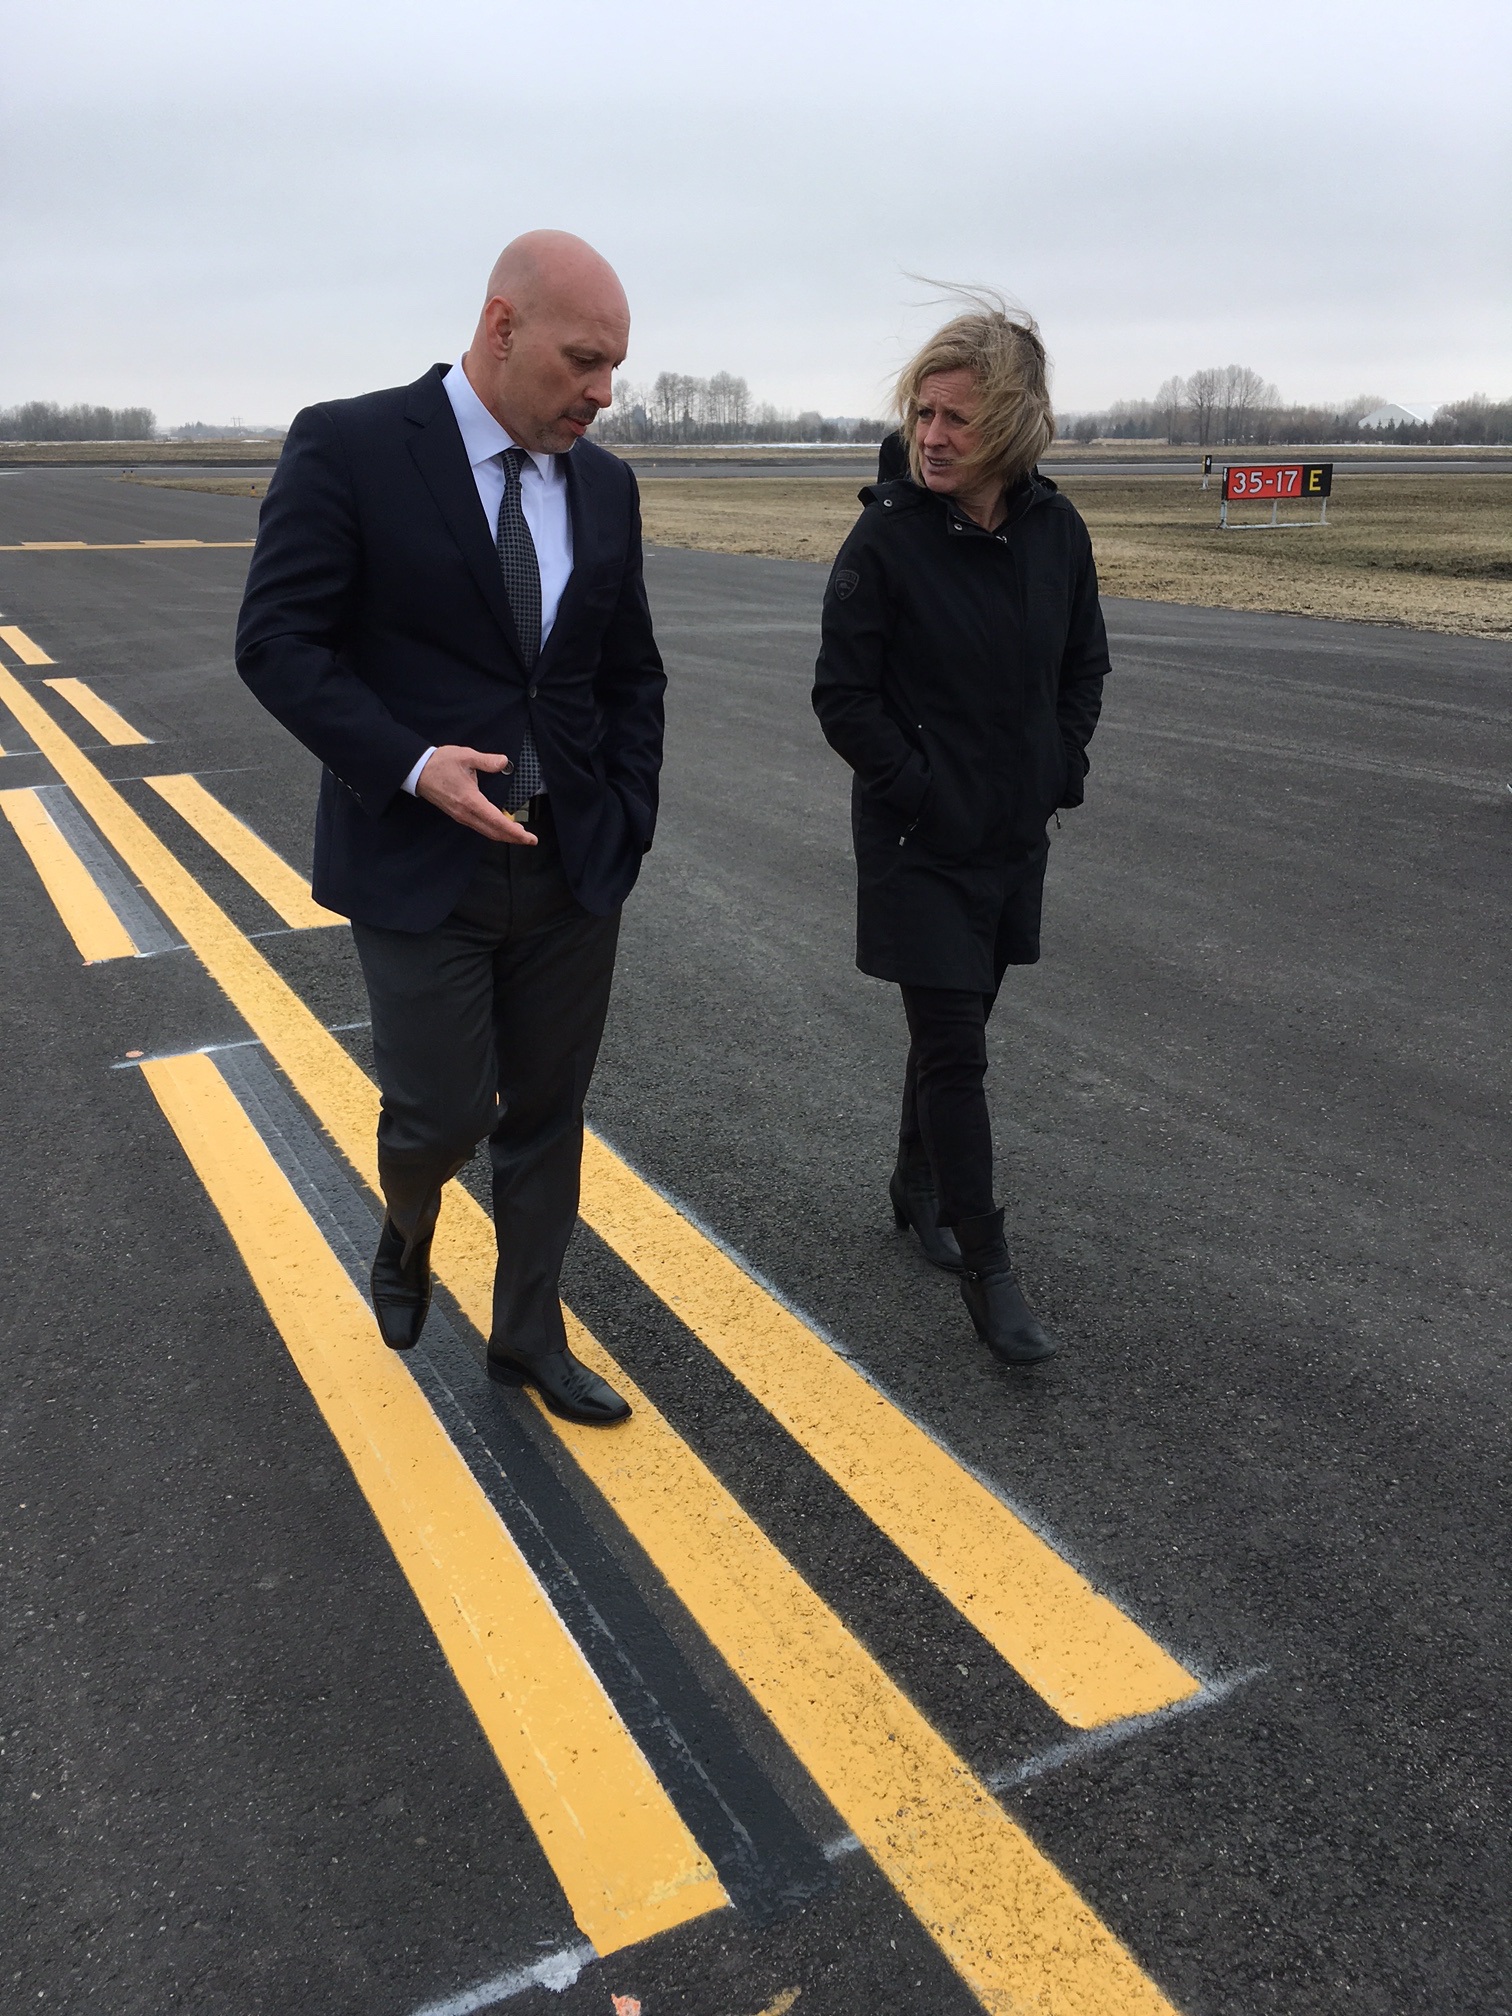 ON TOUR - Red Deer Airport CEO Graham Ingham and Alberta Premier Rachel Notley took a walk on the new runway extension on Thursday. A grand opening of the extension will take place May 12th.